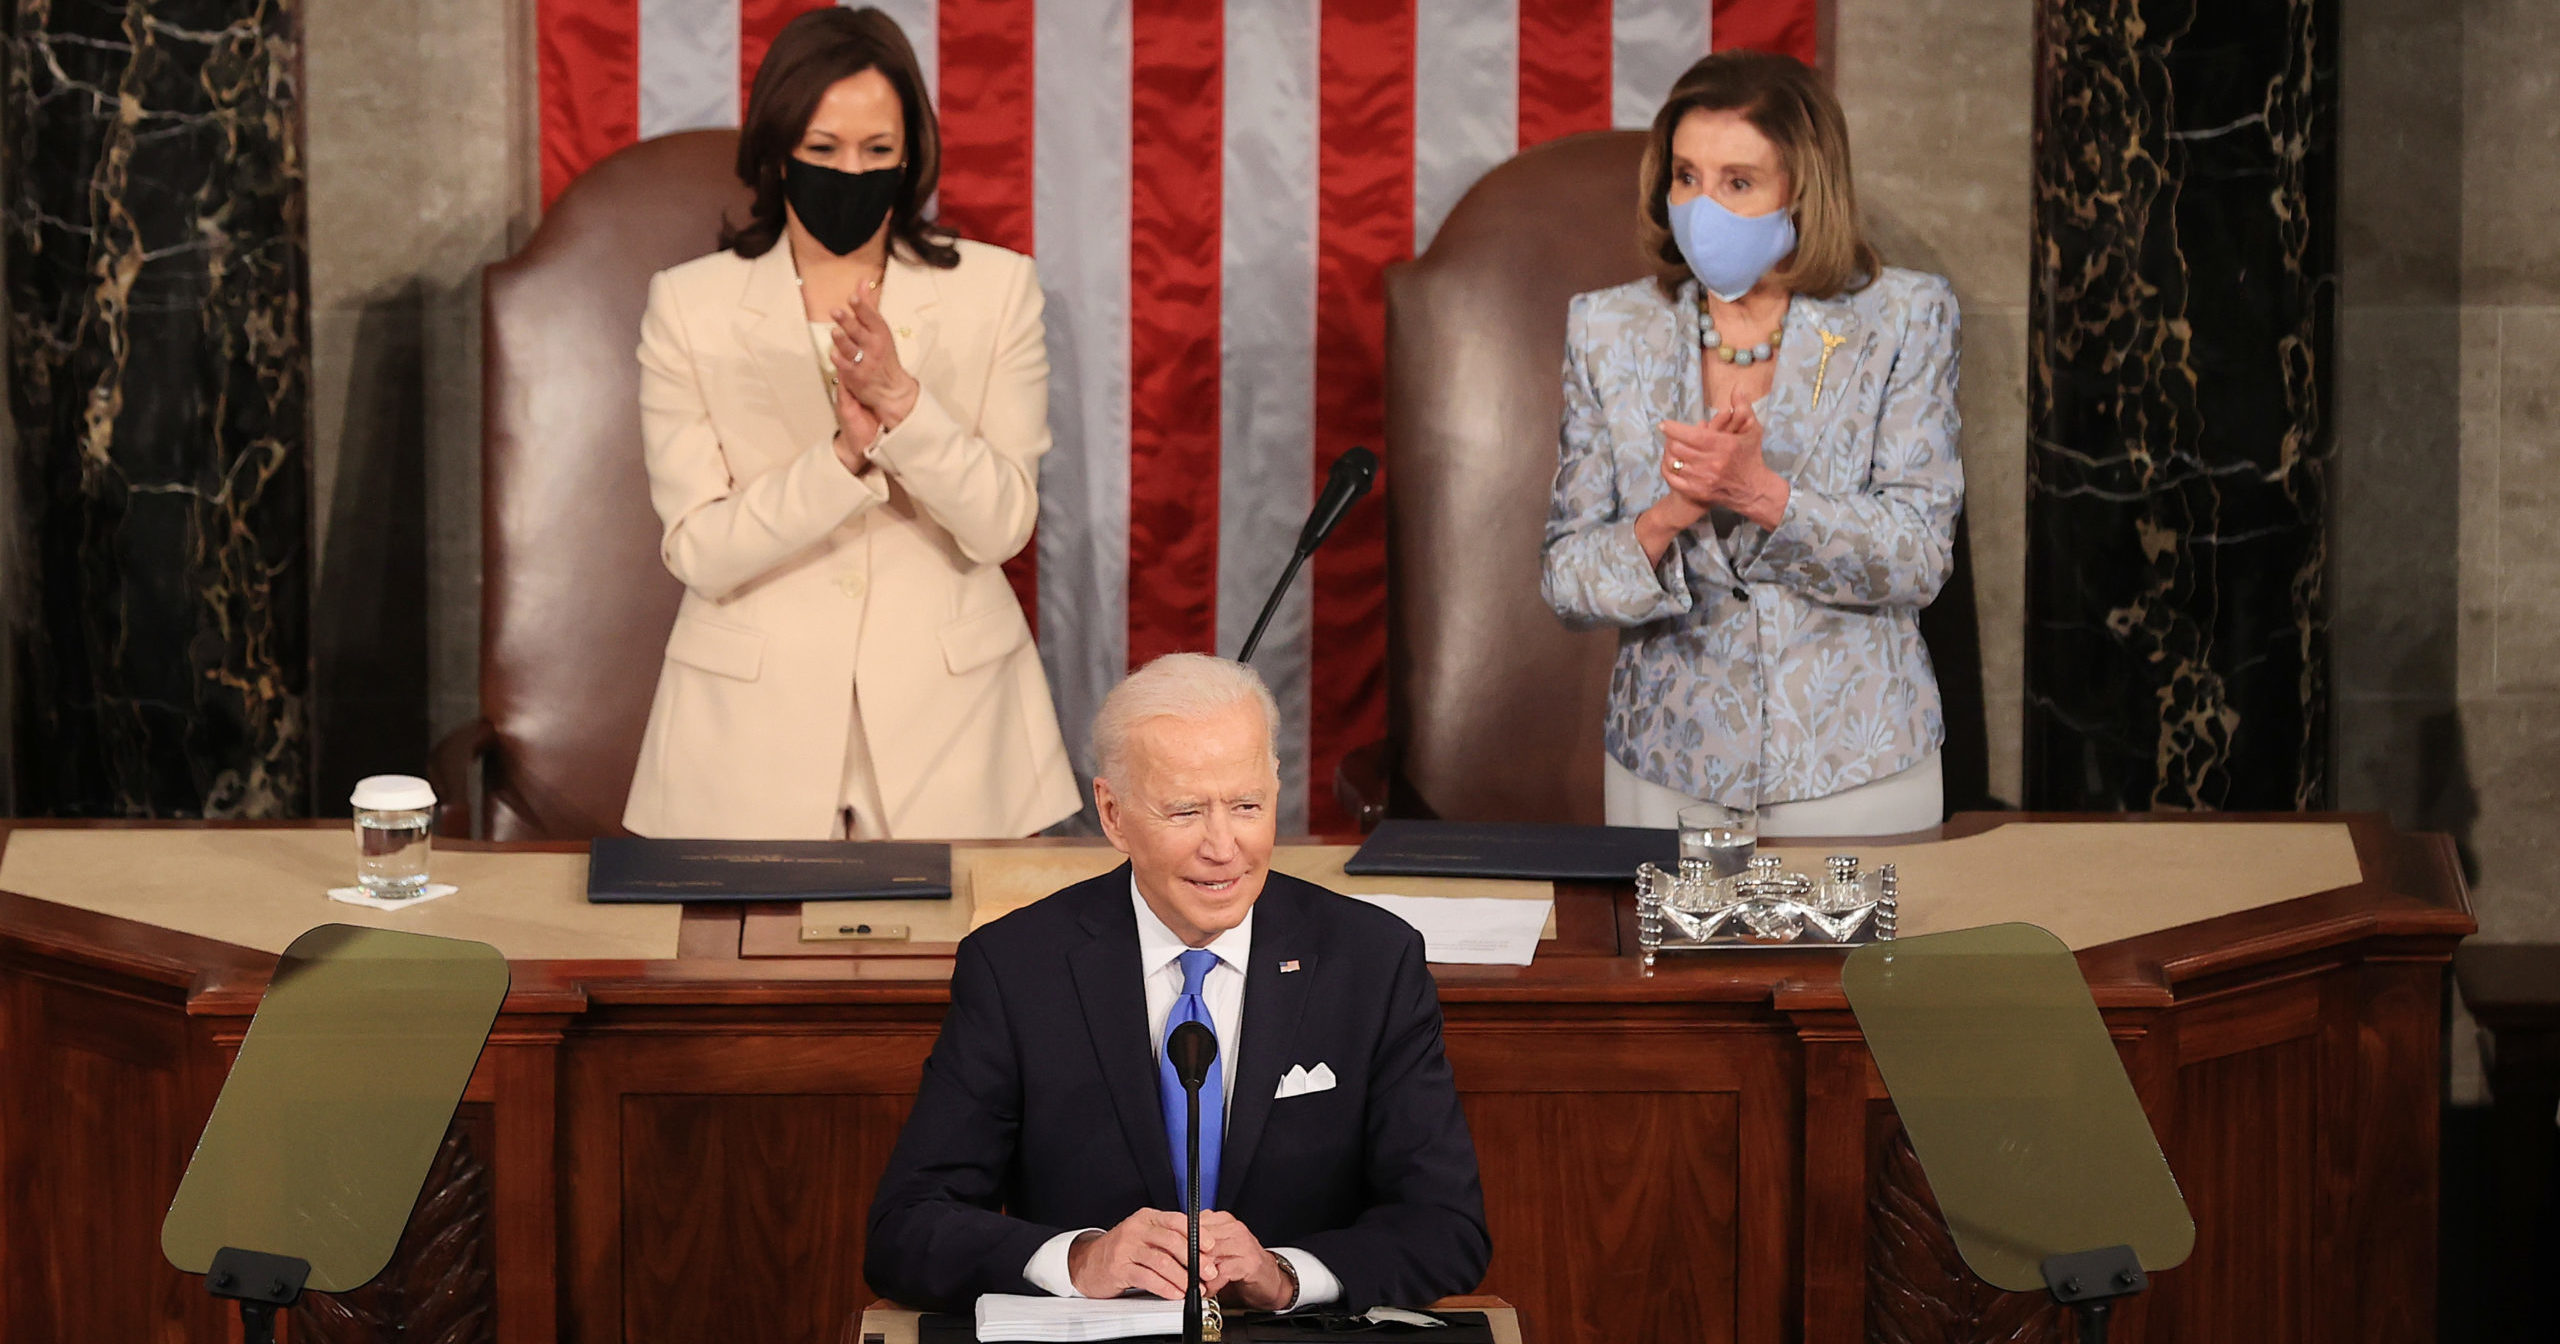 President Joe Biden addresses a joint session of Congress as Vice President Kamala Harris, left, and Democratic Speaker of the House Nancy Pelosi, right, look on in the House chamber of the U.S. Capitol on Wednesday in Washington, D.C.